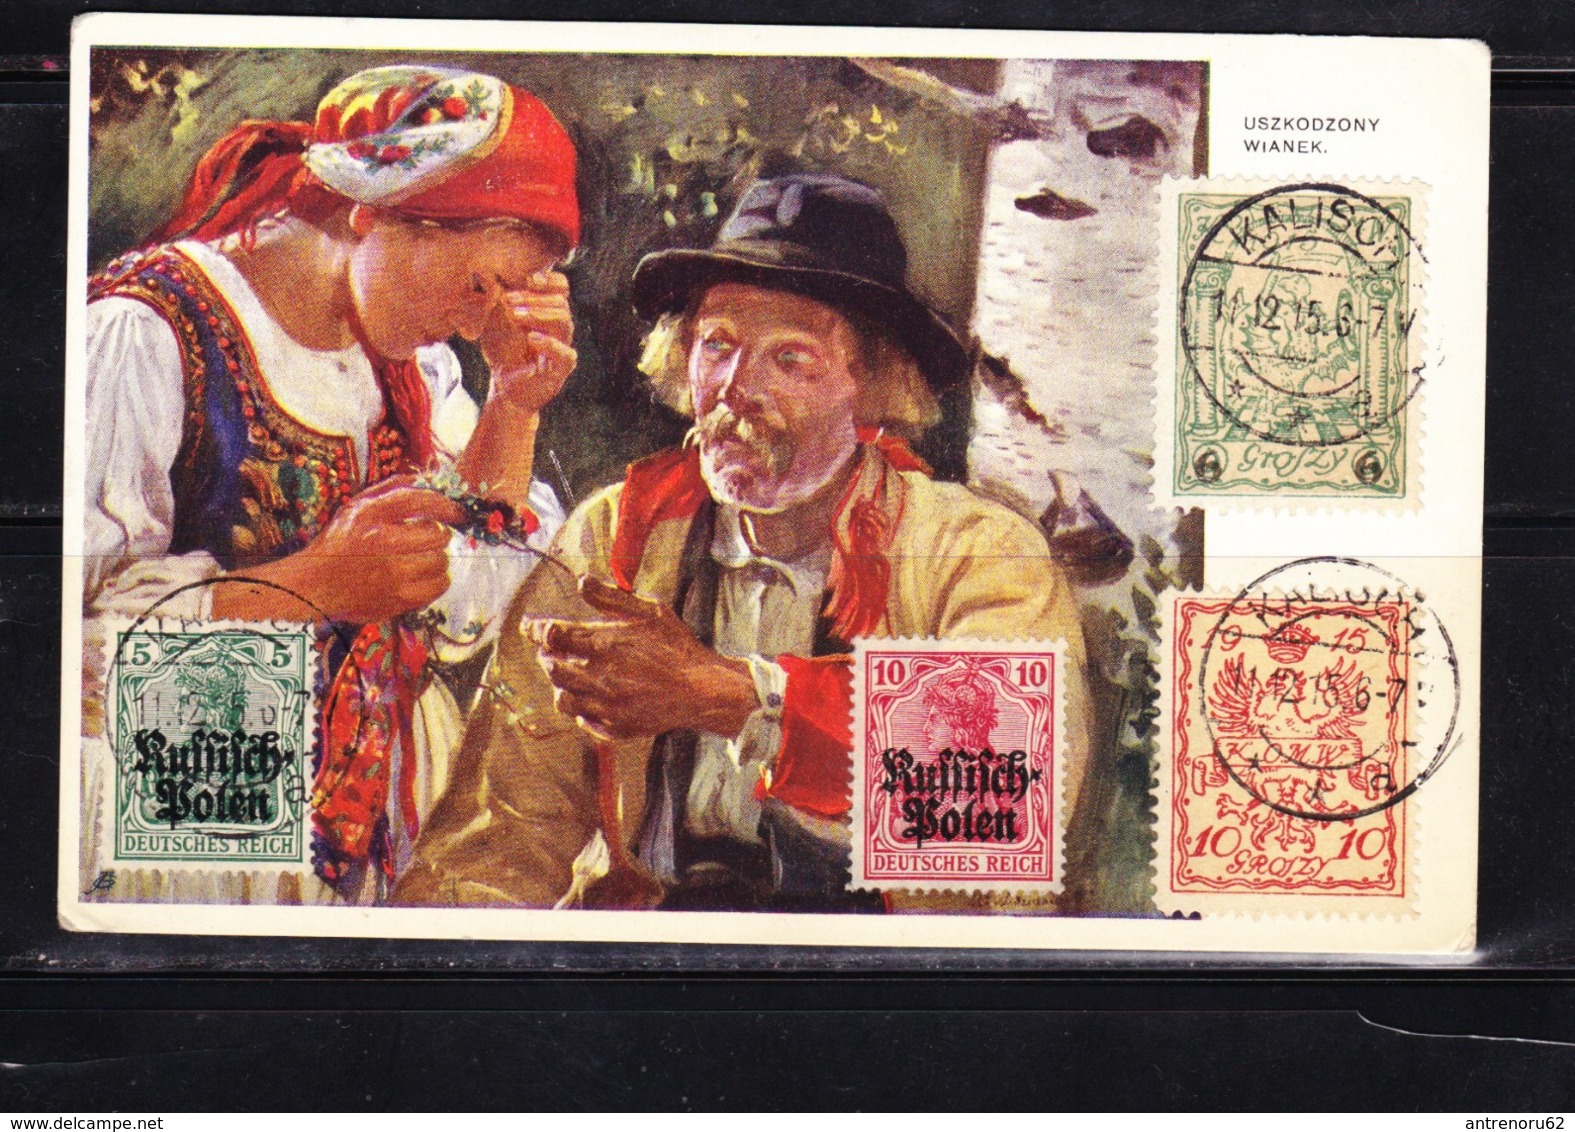 POSTCARD-POLAND-1915-THE GERMAN-OCCUPATION-SEE-SCAN-STAMPS-VERY RARE-5/6 GROSZ-10-GROSZ - Used Stamps